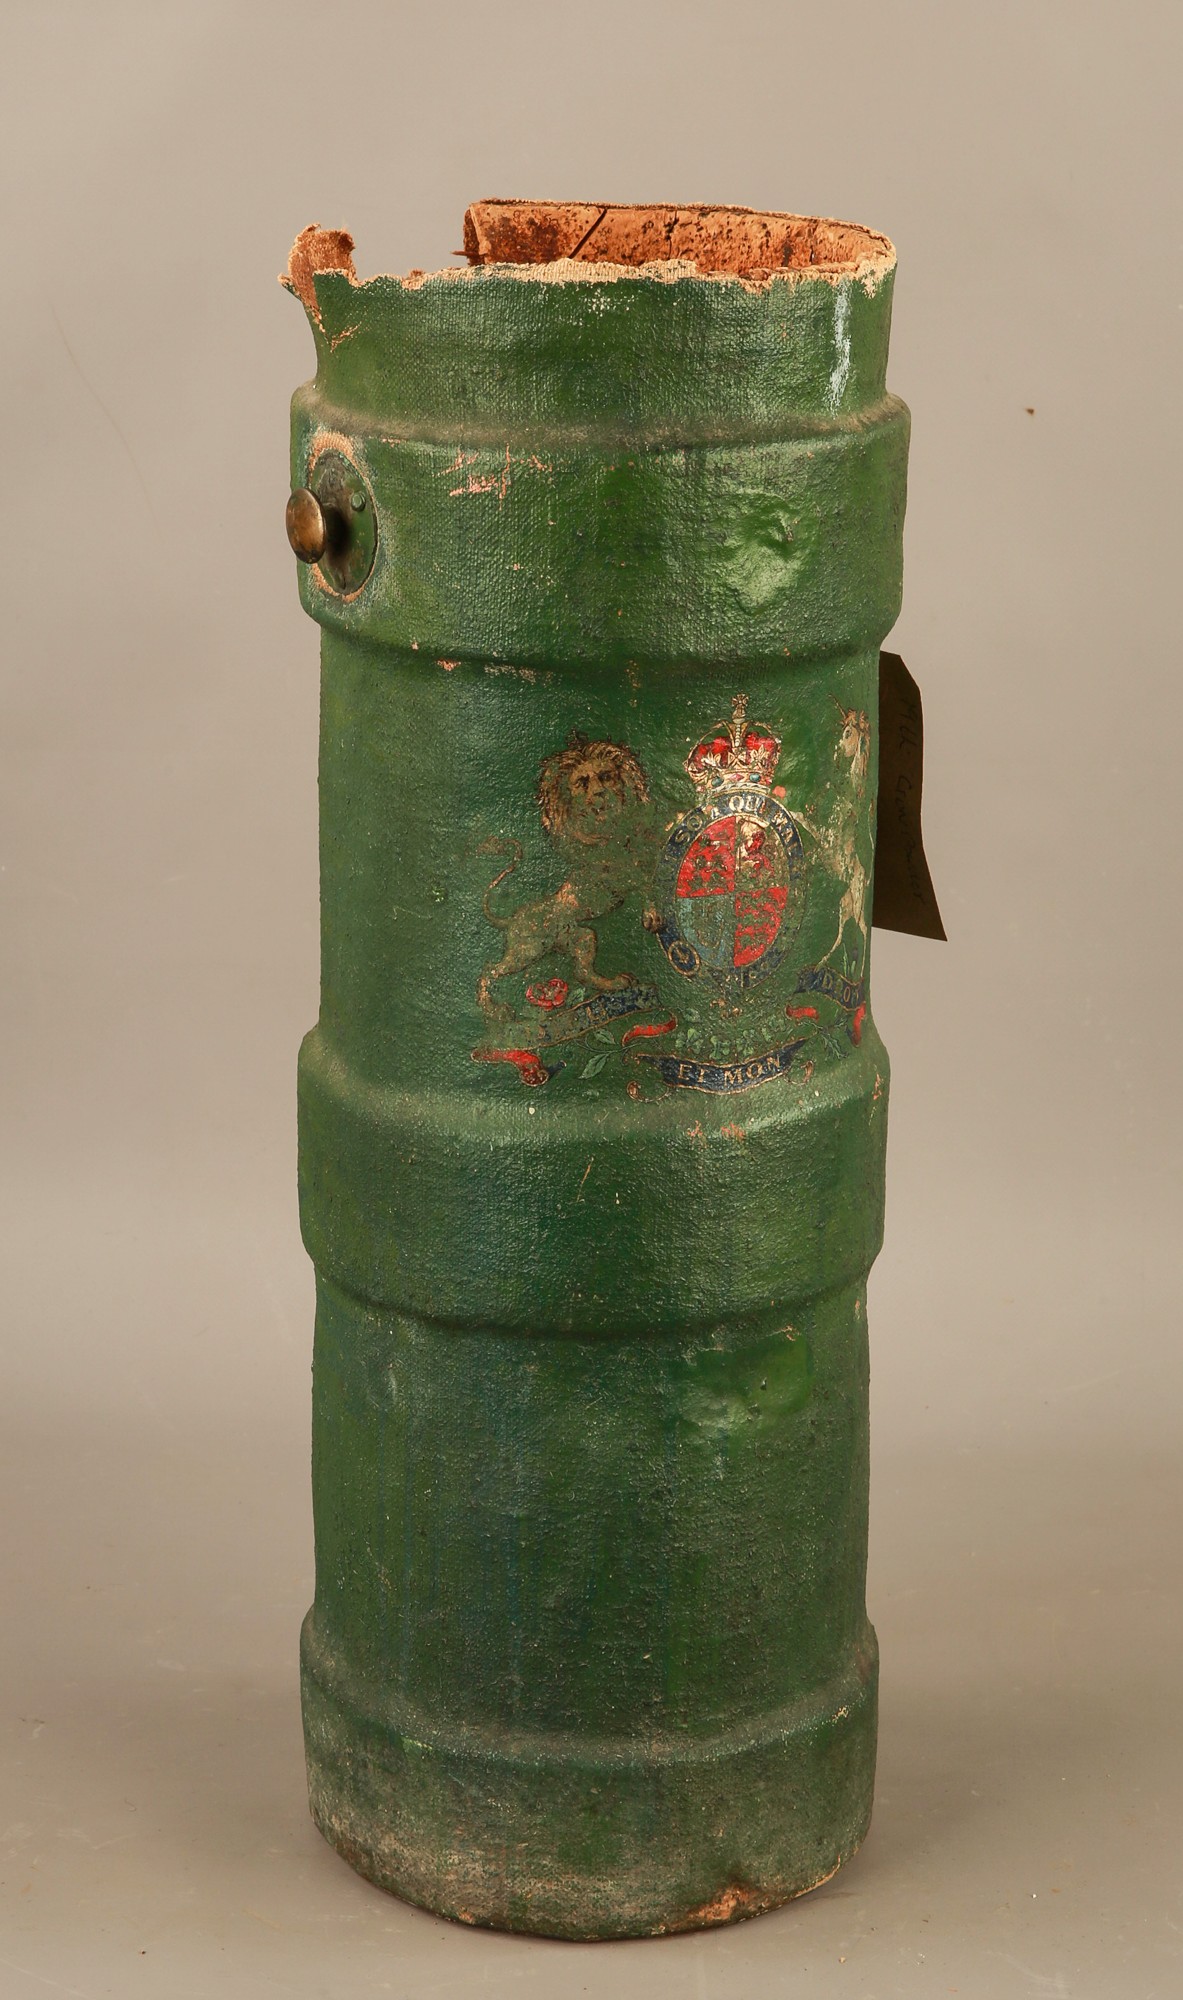 An Early 19th Century Gunpowder Carrier (bucket). An early, British Navy container used by young